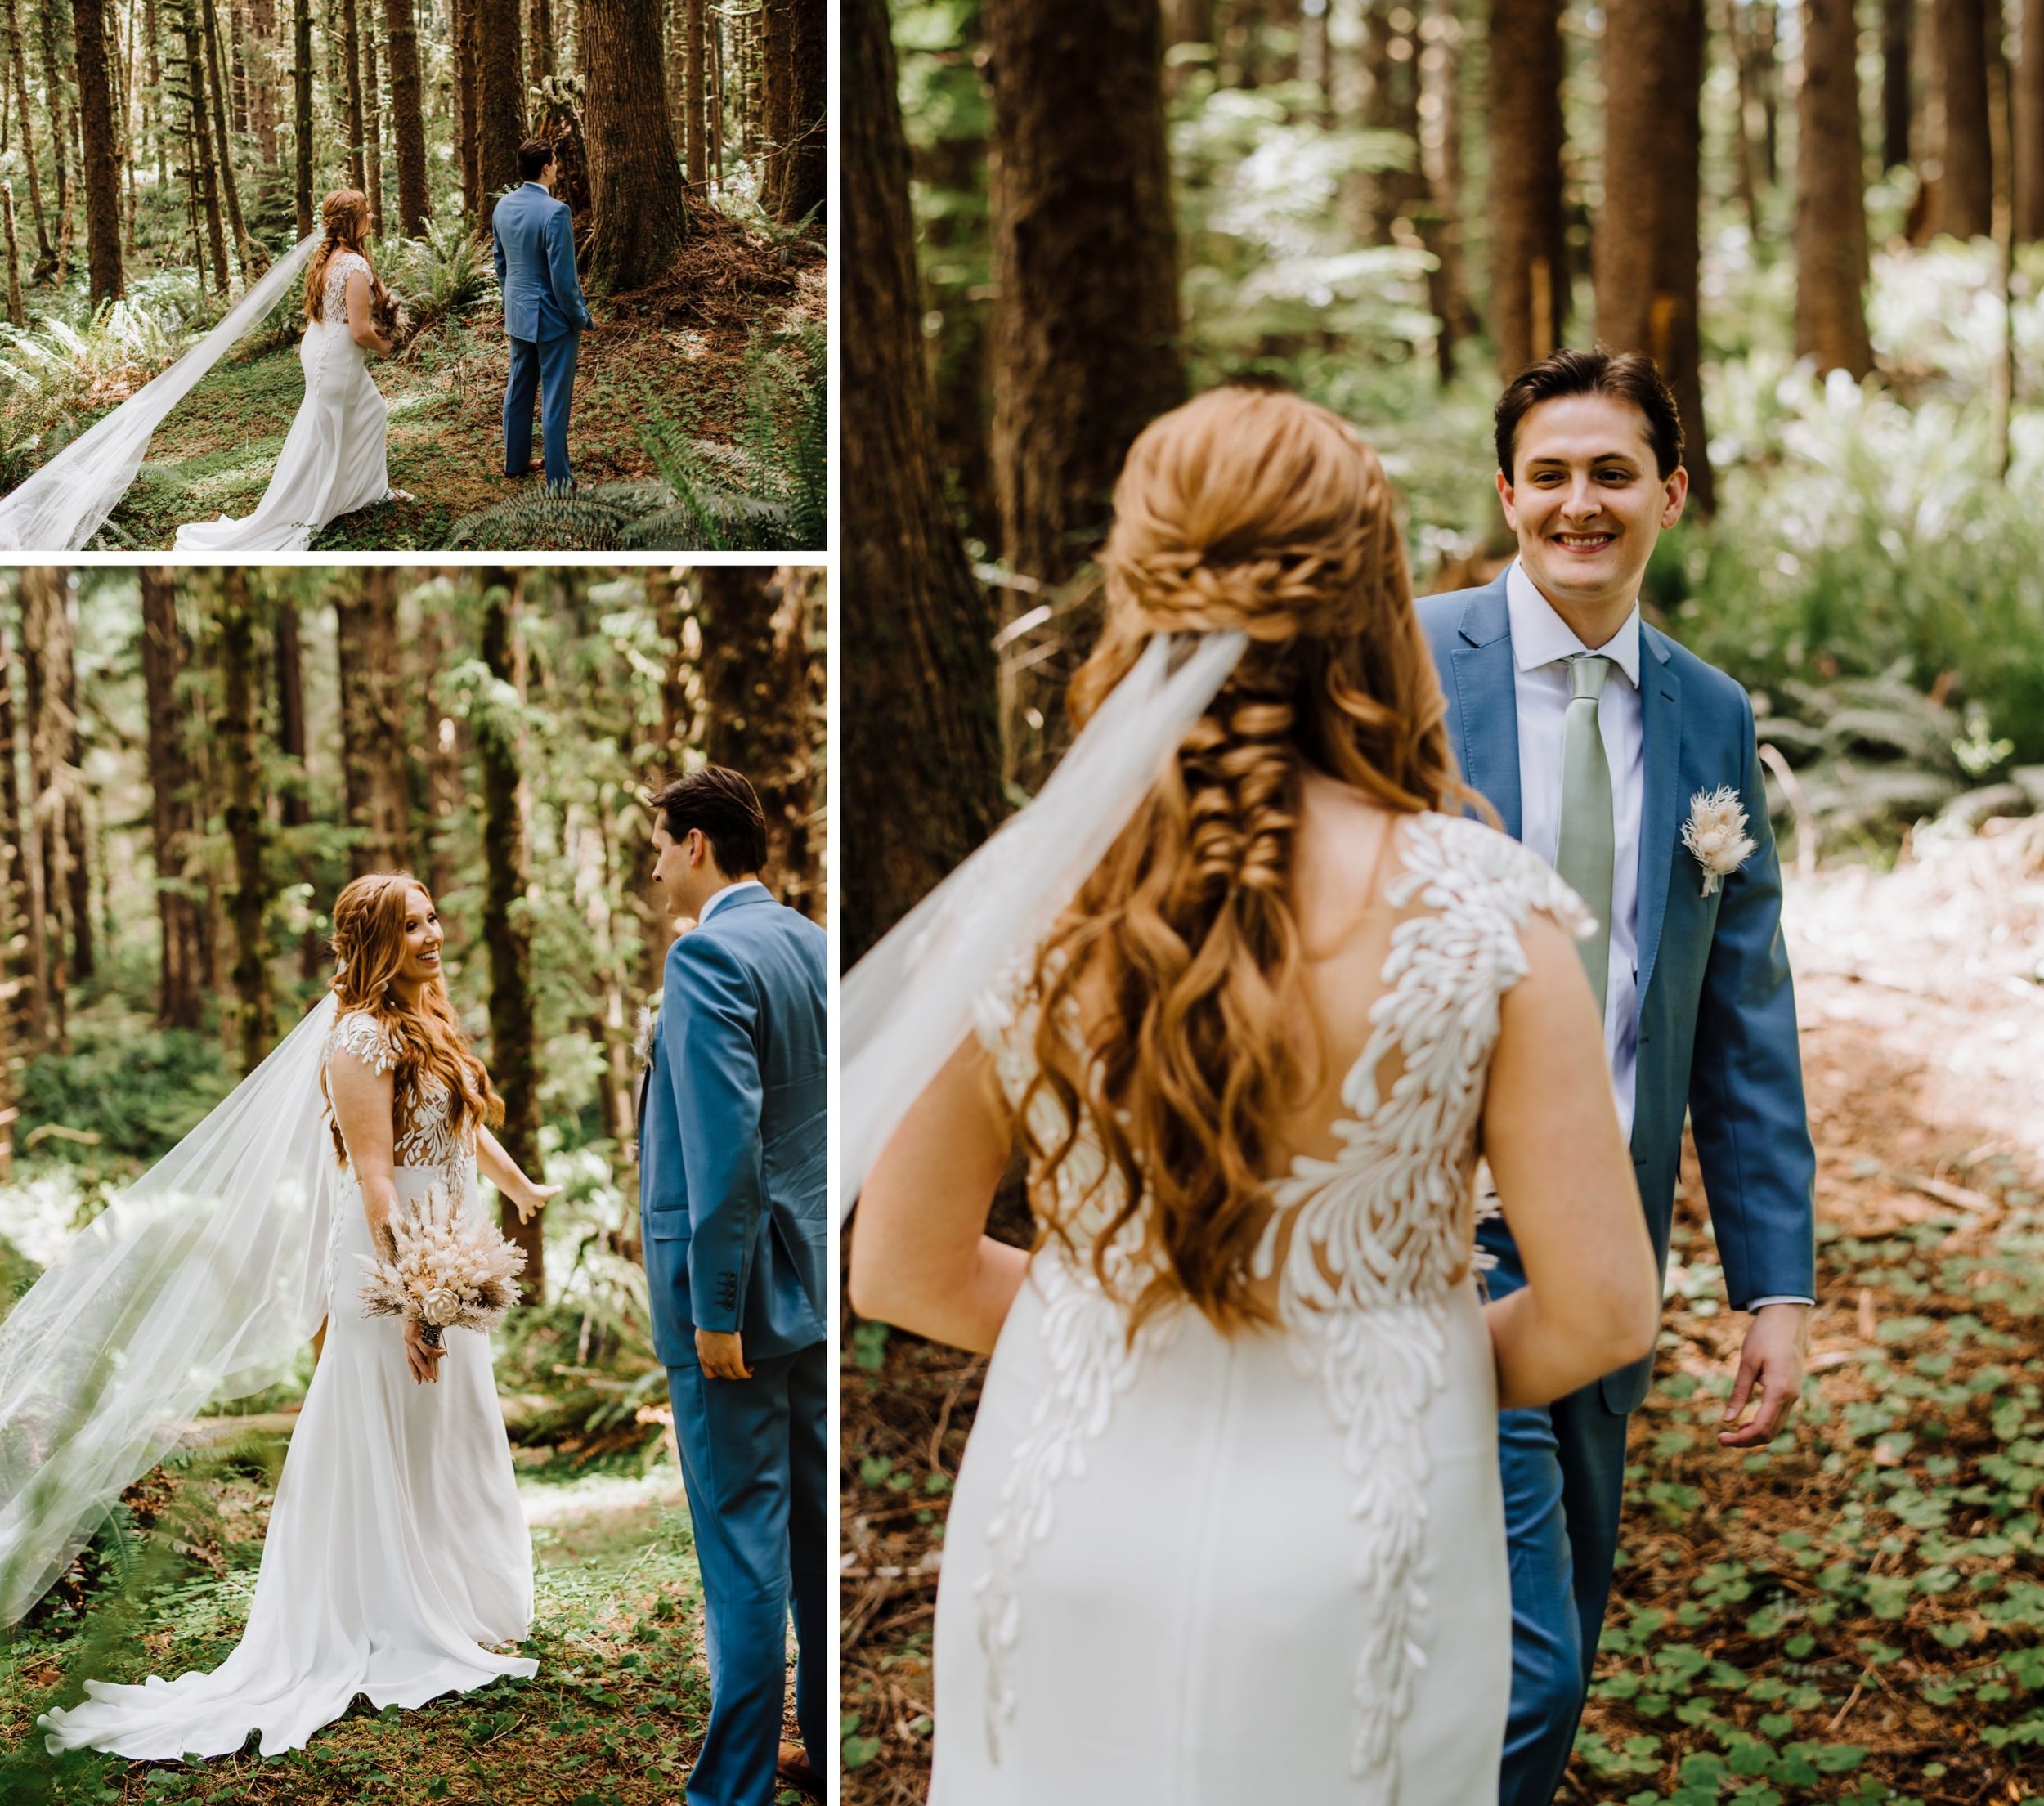 Intimate-Elopement-at-Ecola-State-Park006.jpg